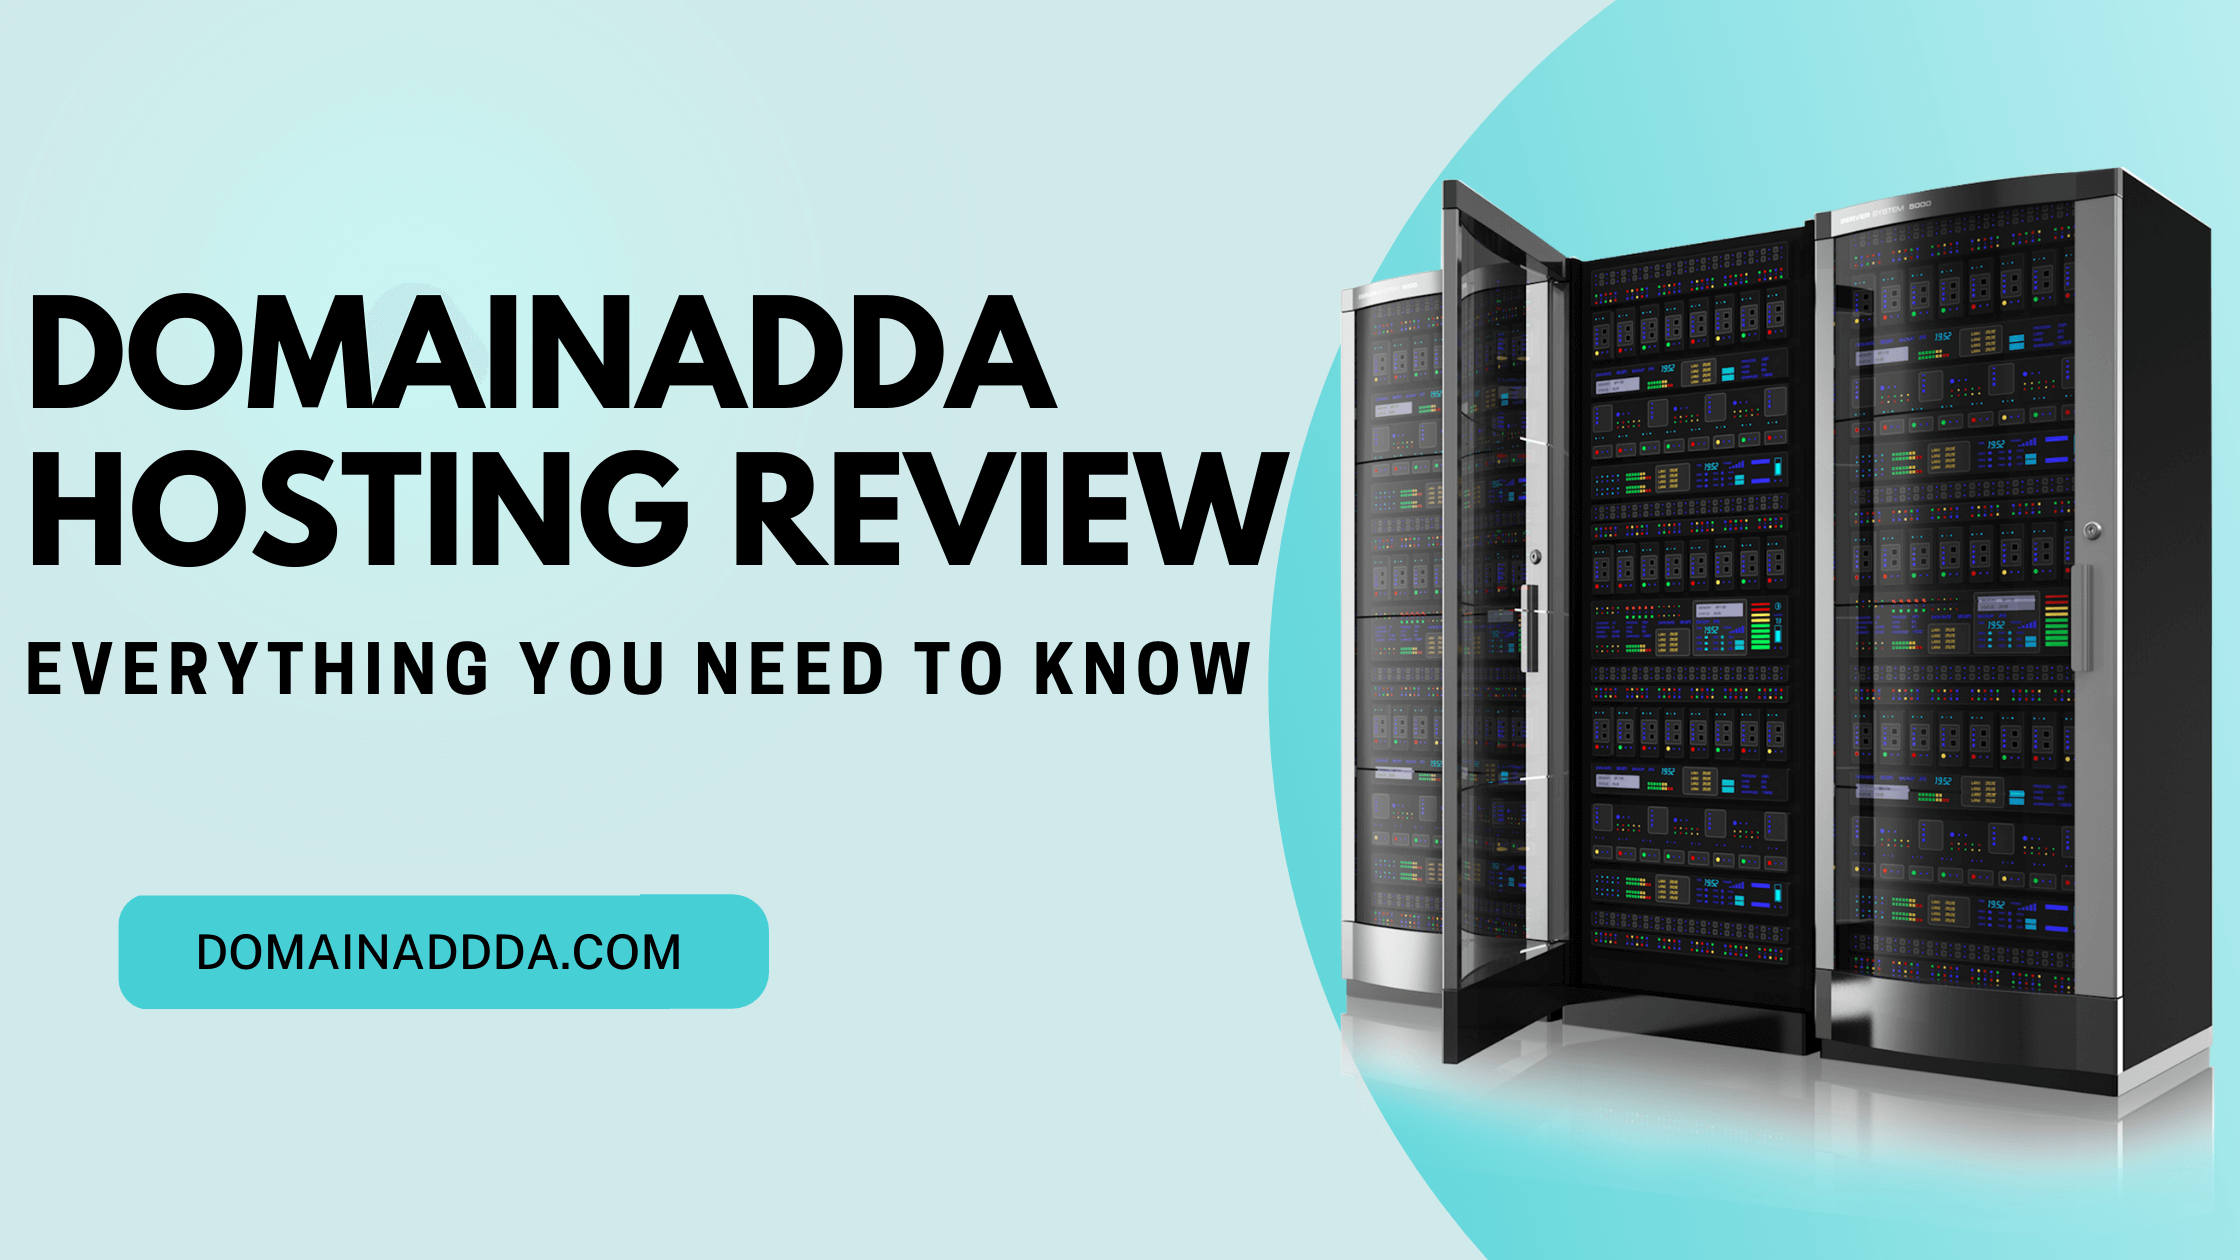 DomainAdda Hosting Review Everything You Need to Know (2022)